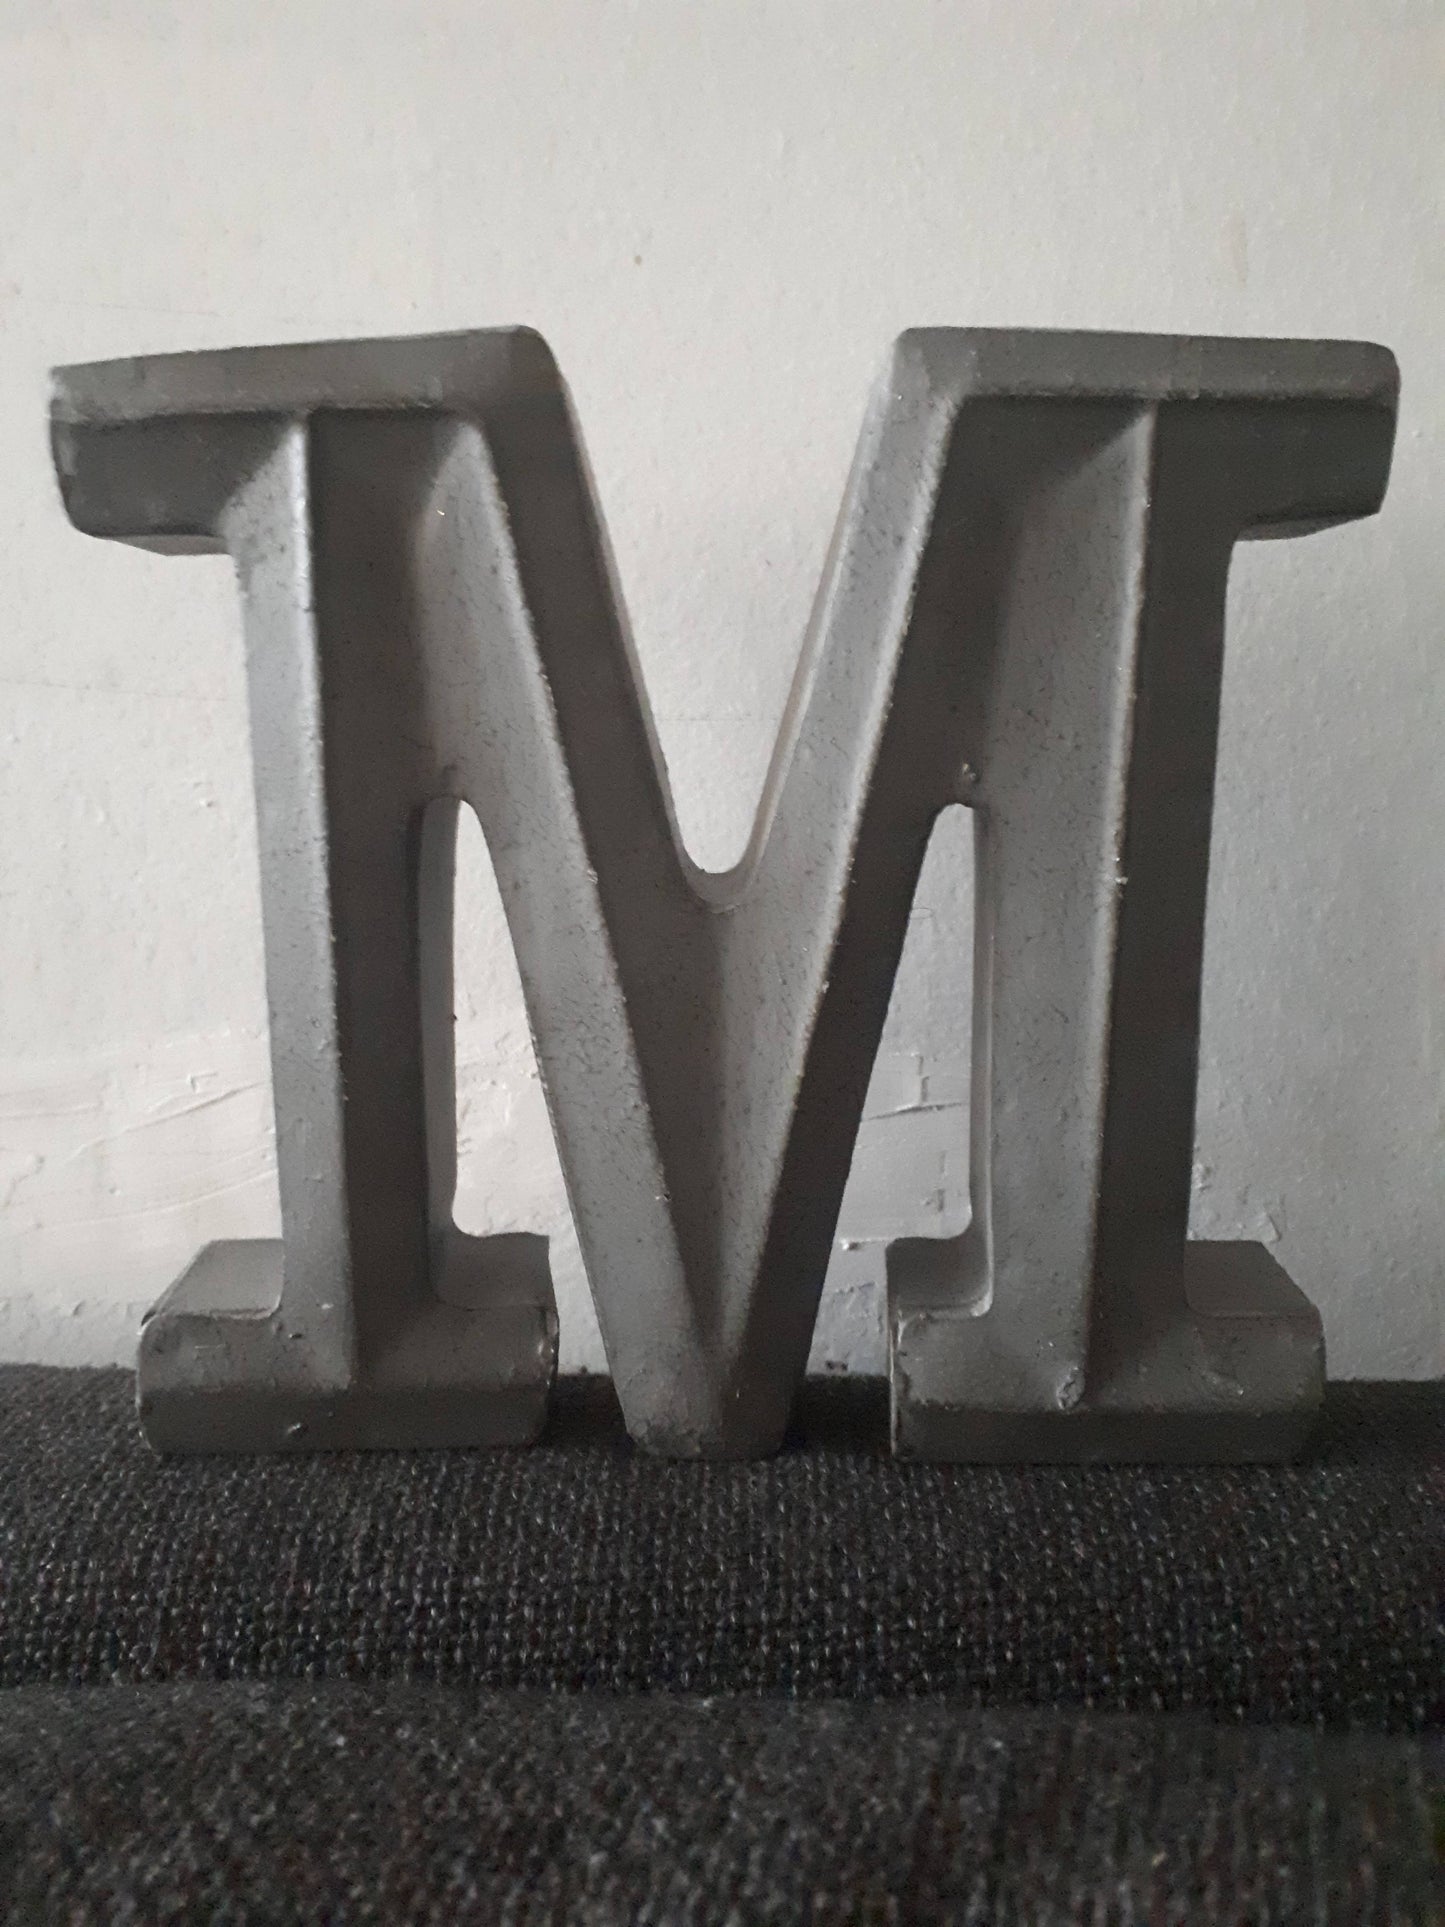 Metal Decorative Letter M Wall Hanging